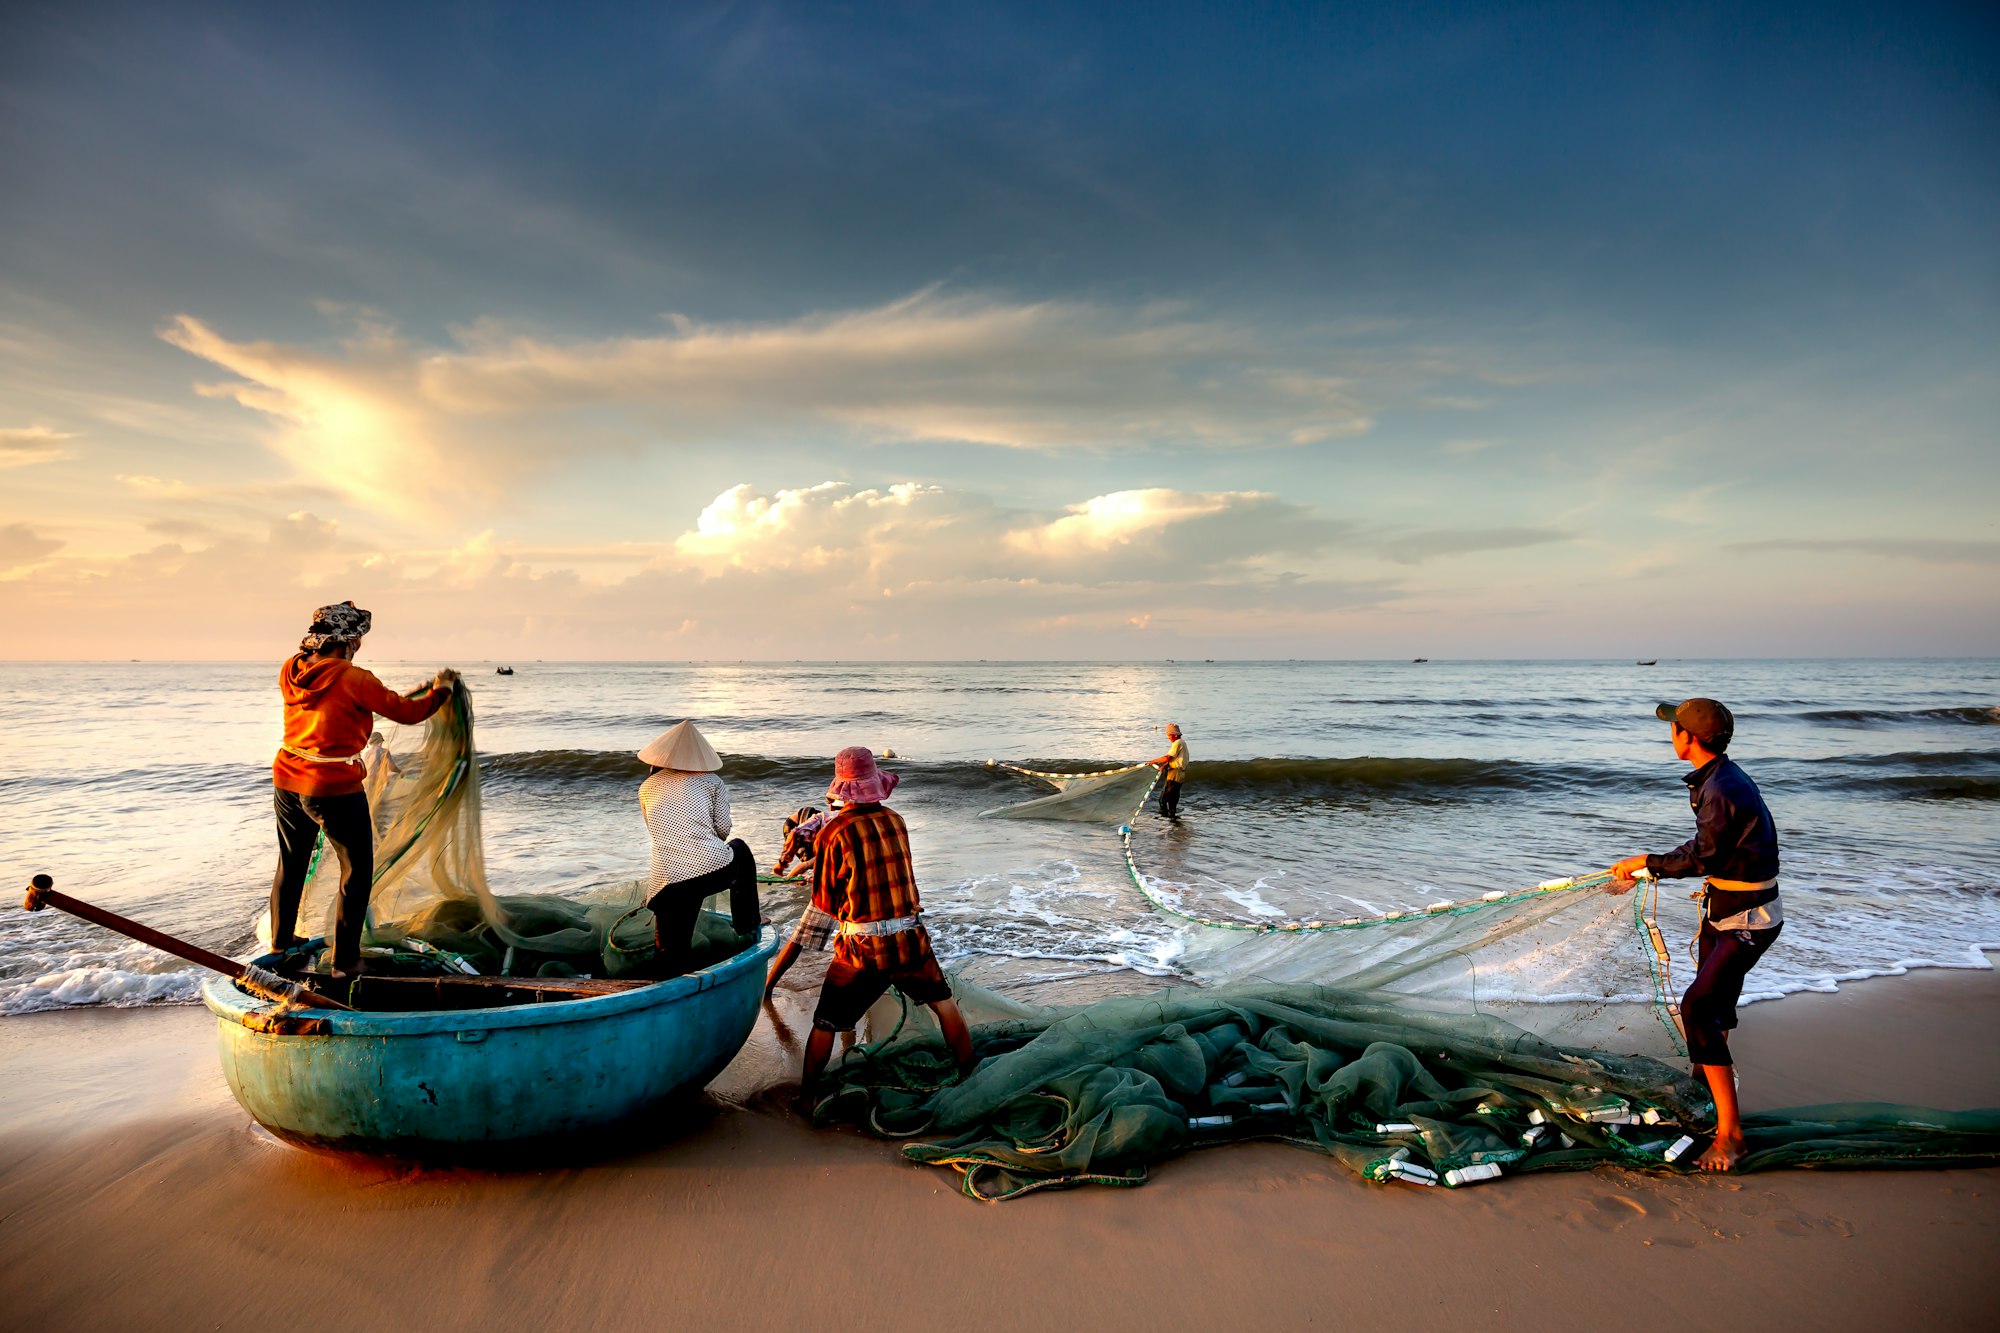 Beach Lagi, Binh Thuan province, Vietnam - August 29, 2015: Unknown Fishermen who pull up th are the fishing nets khi sunrise. This is ask for their daily work